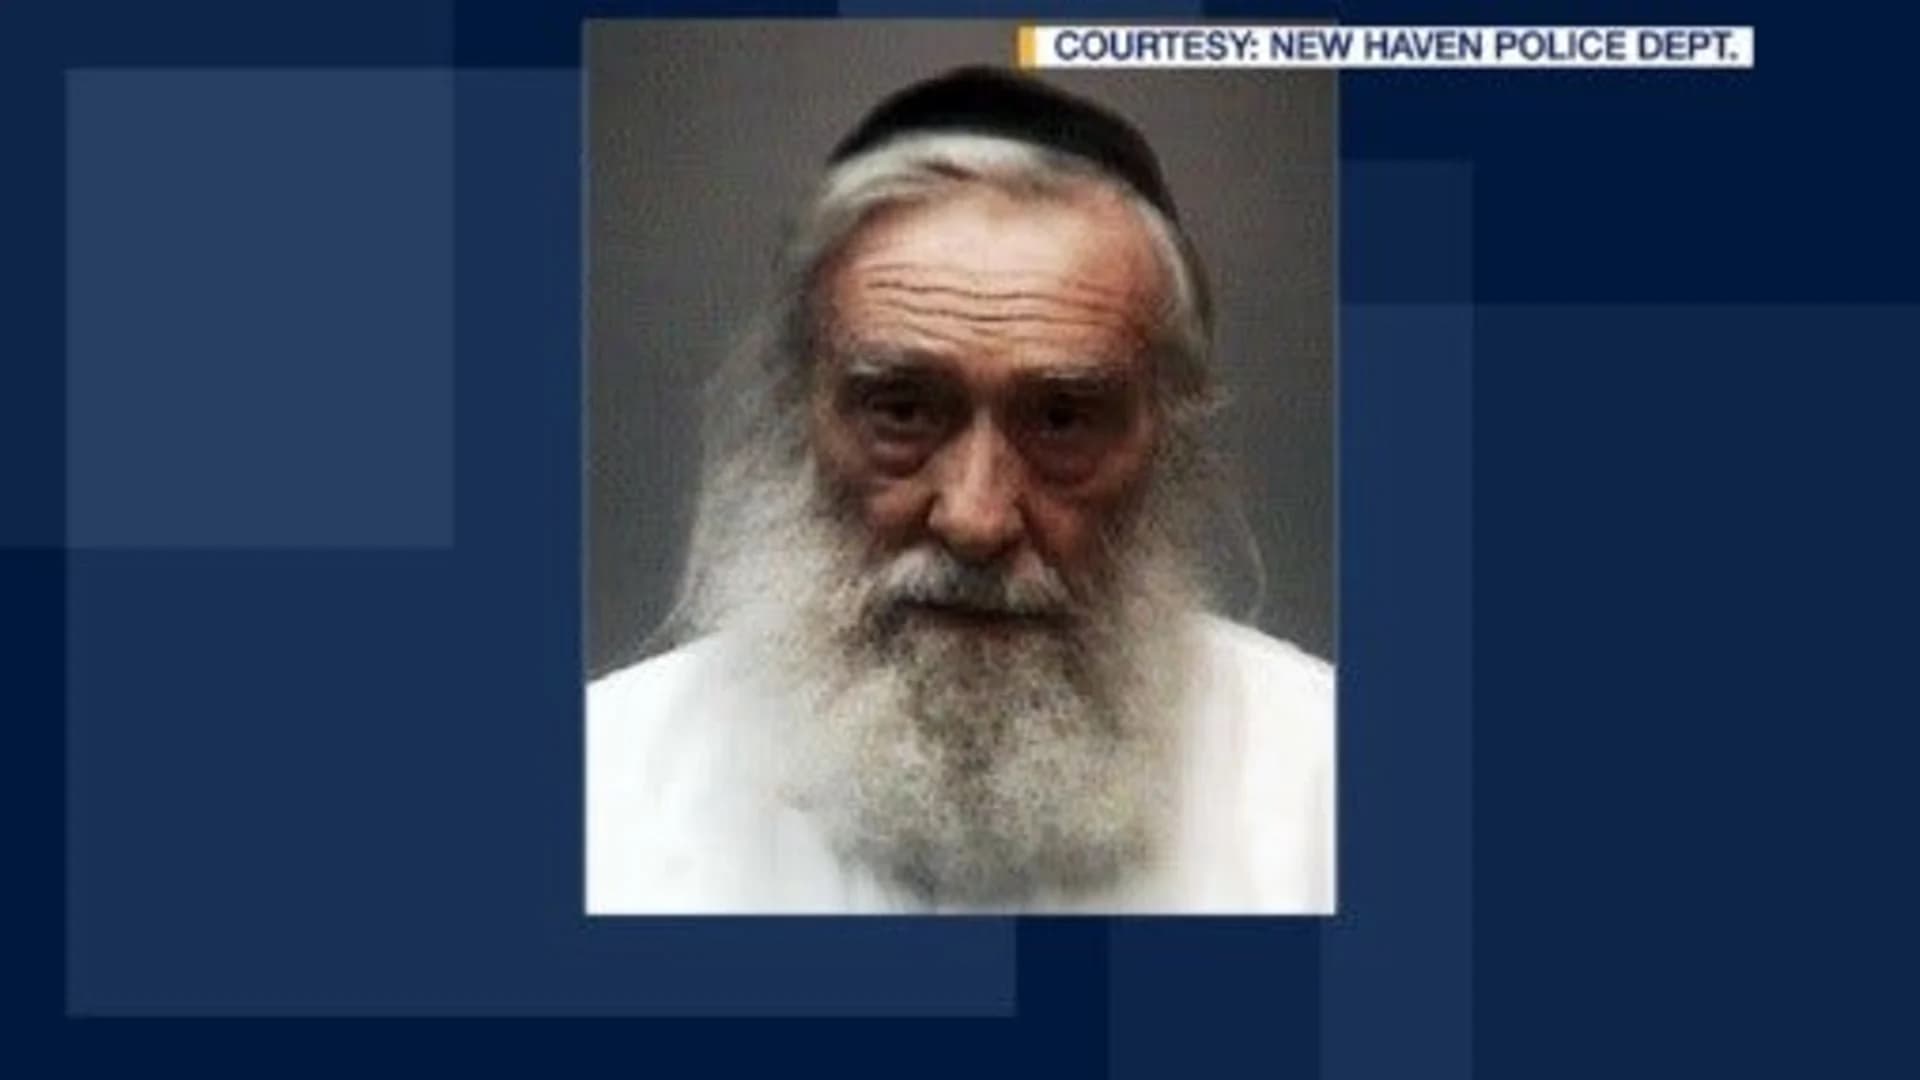 Not guilty pleas entered for rabbi in school sex abuse case